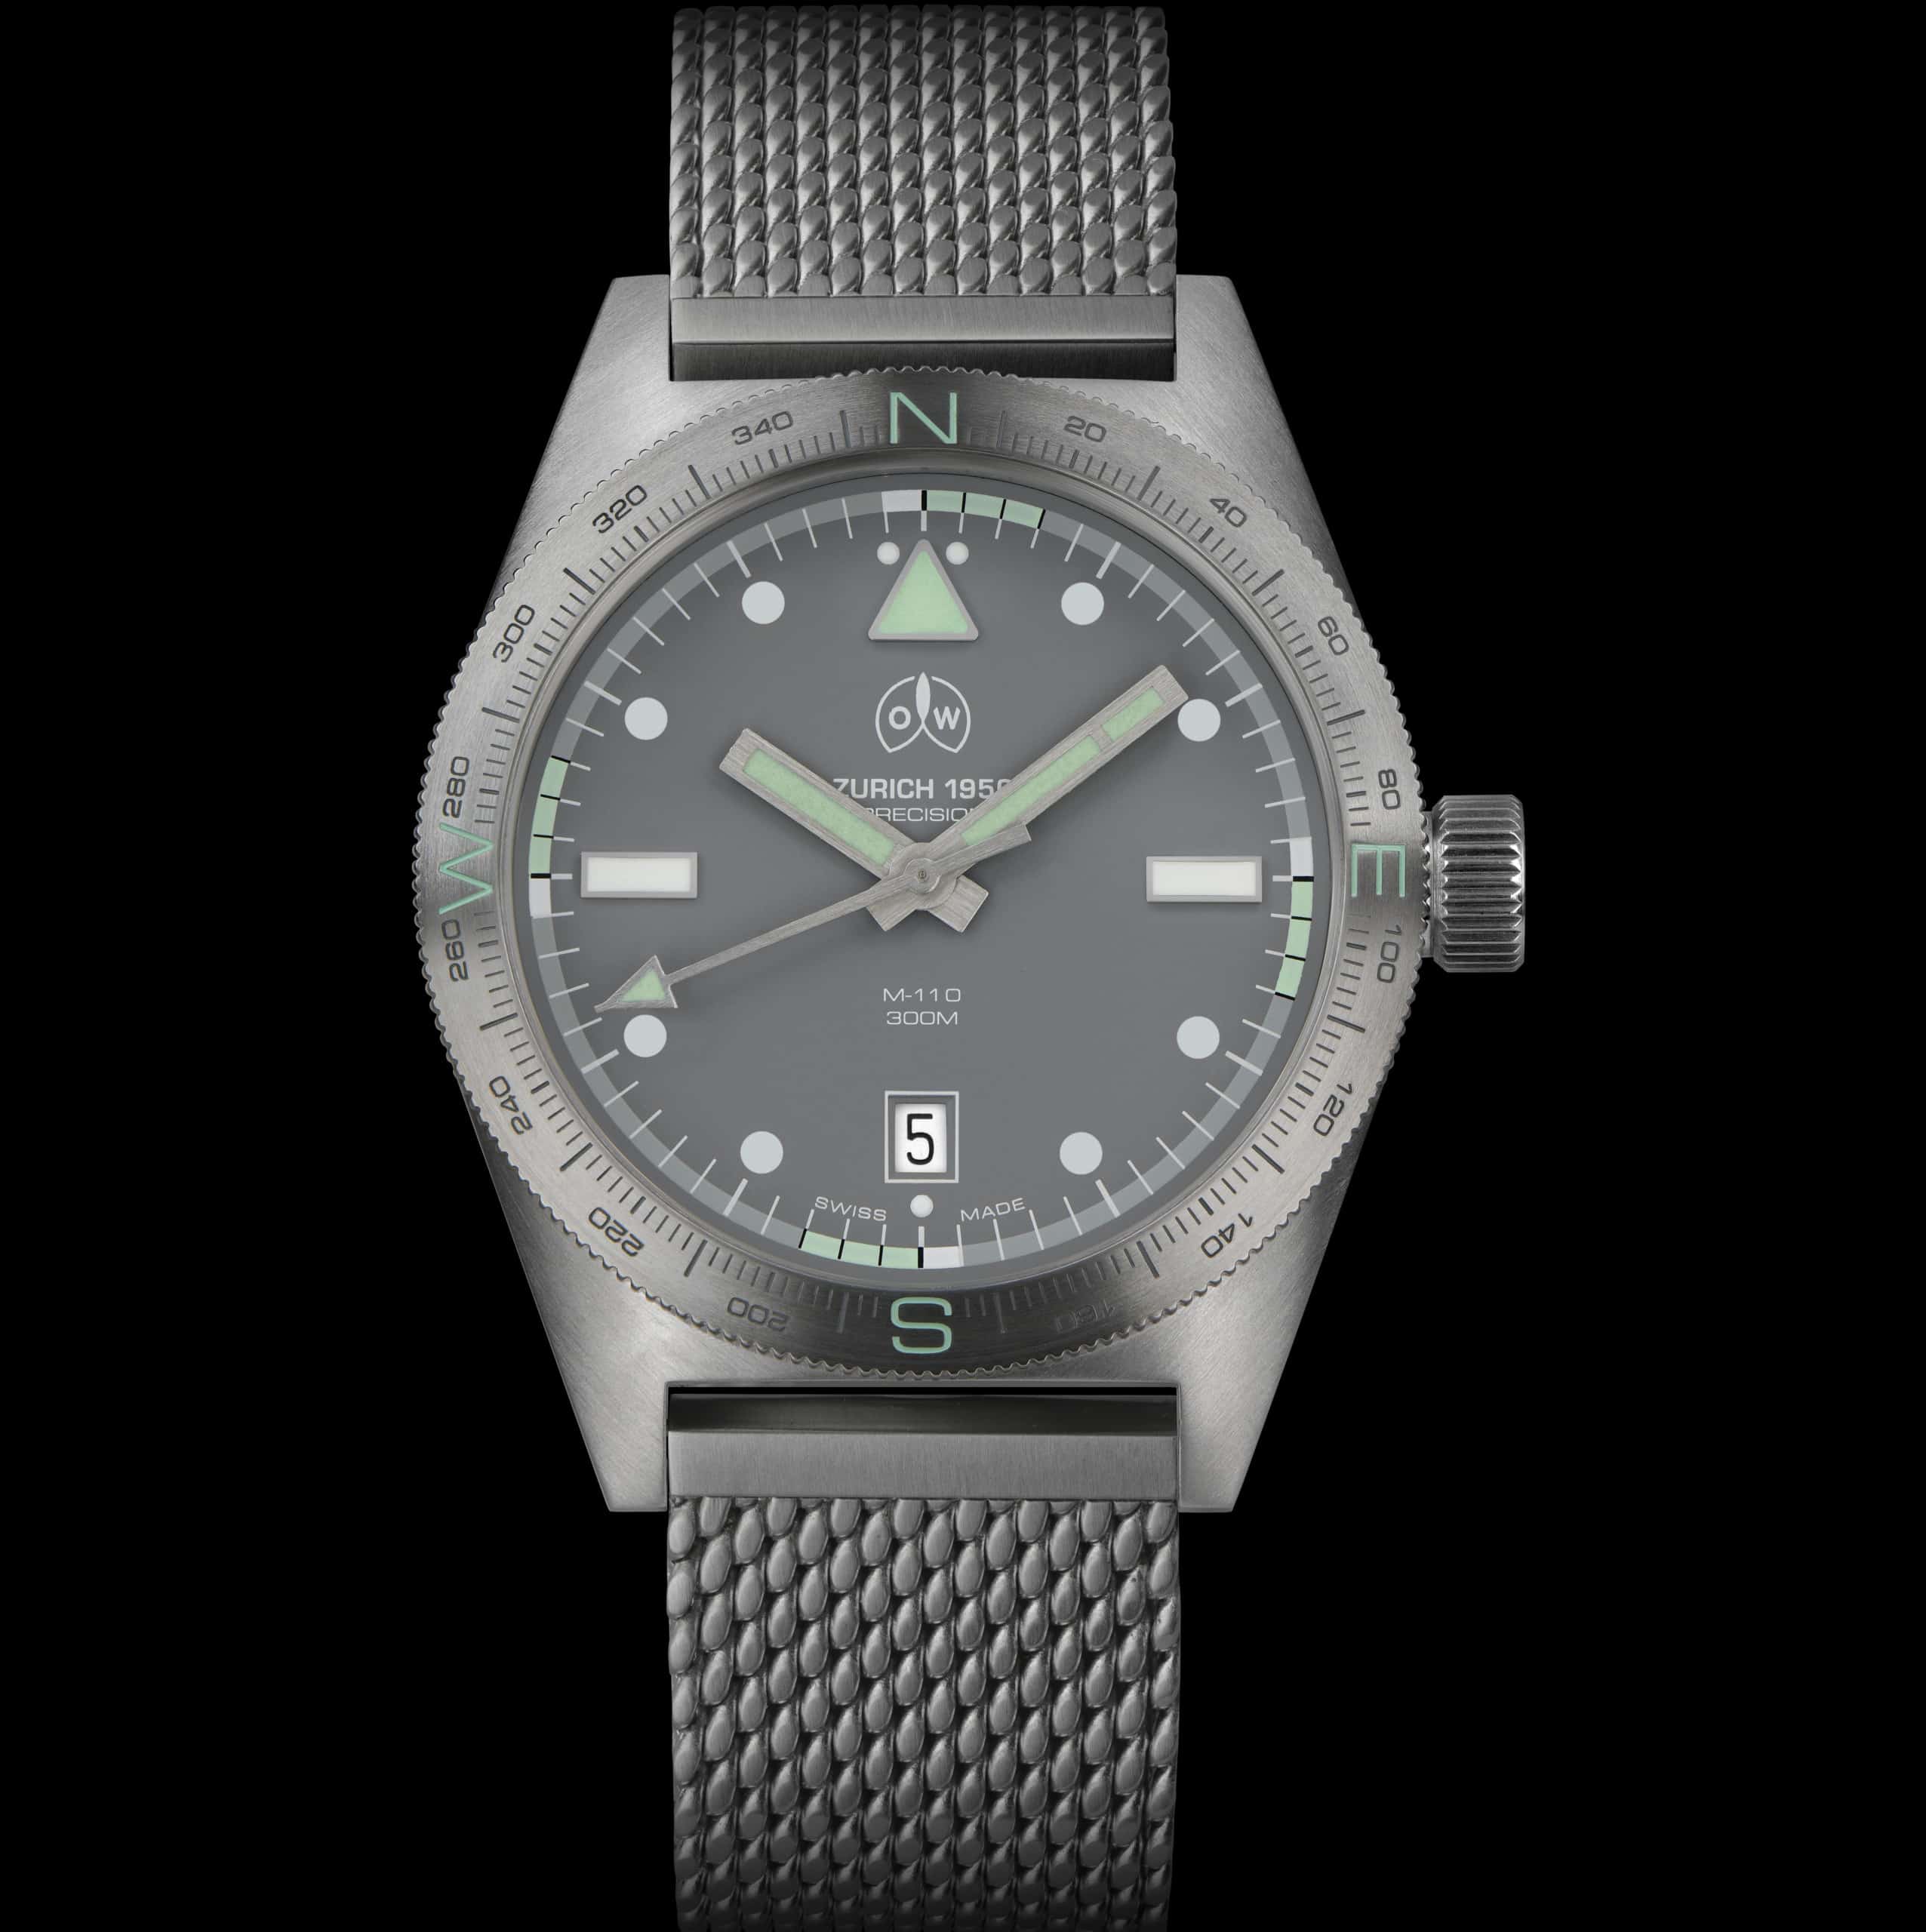 Ollech & Wajs Introduces A New Bezel And Movement With The M110